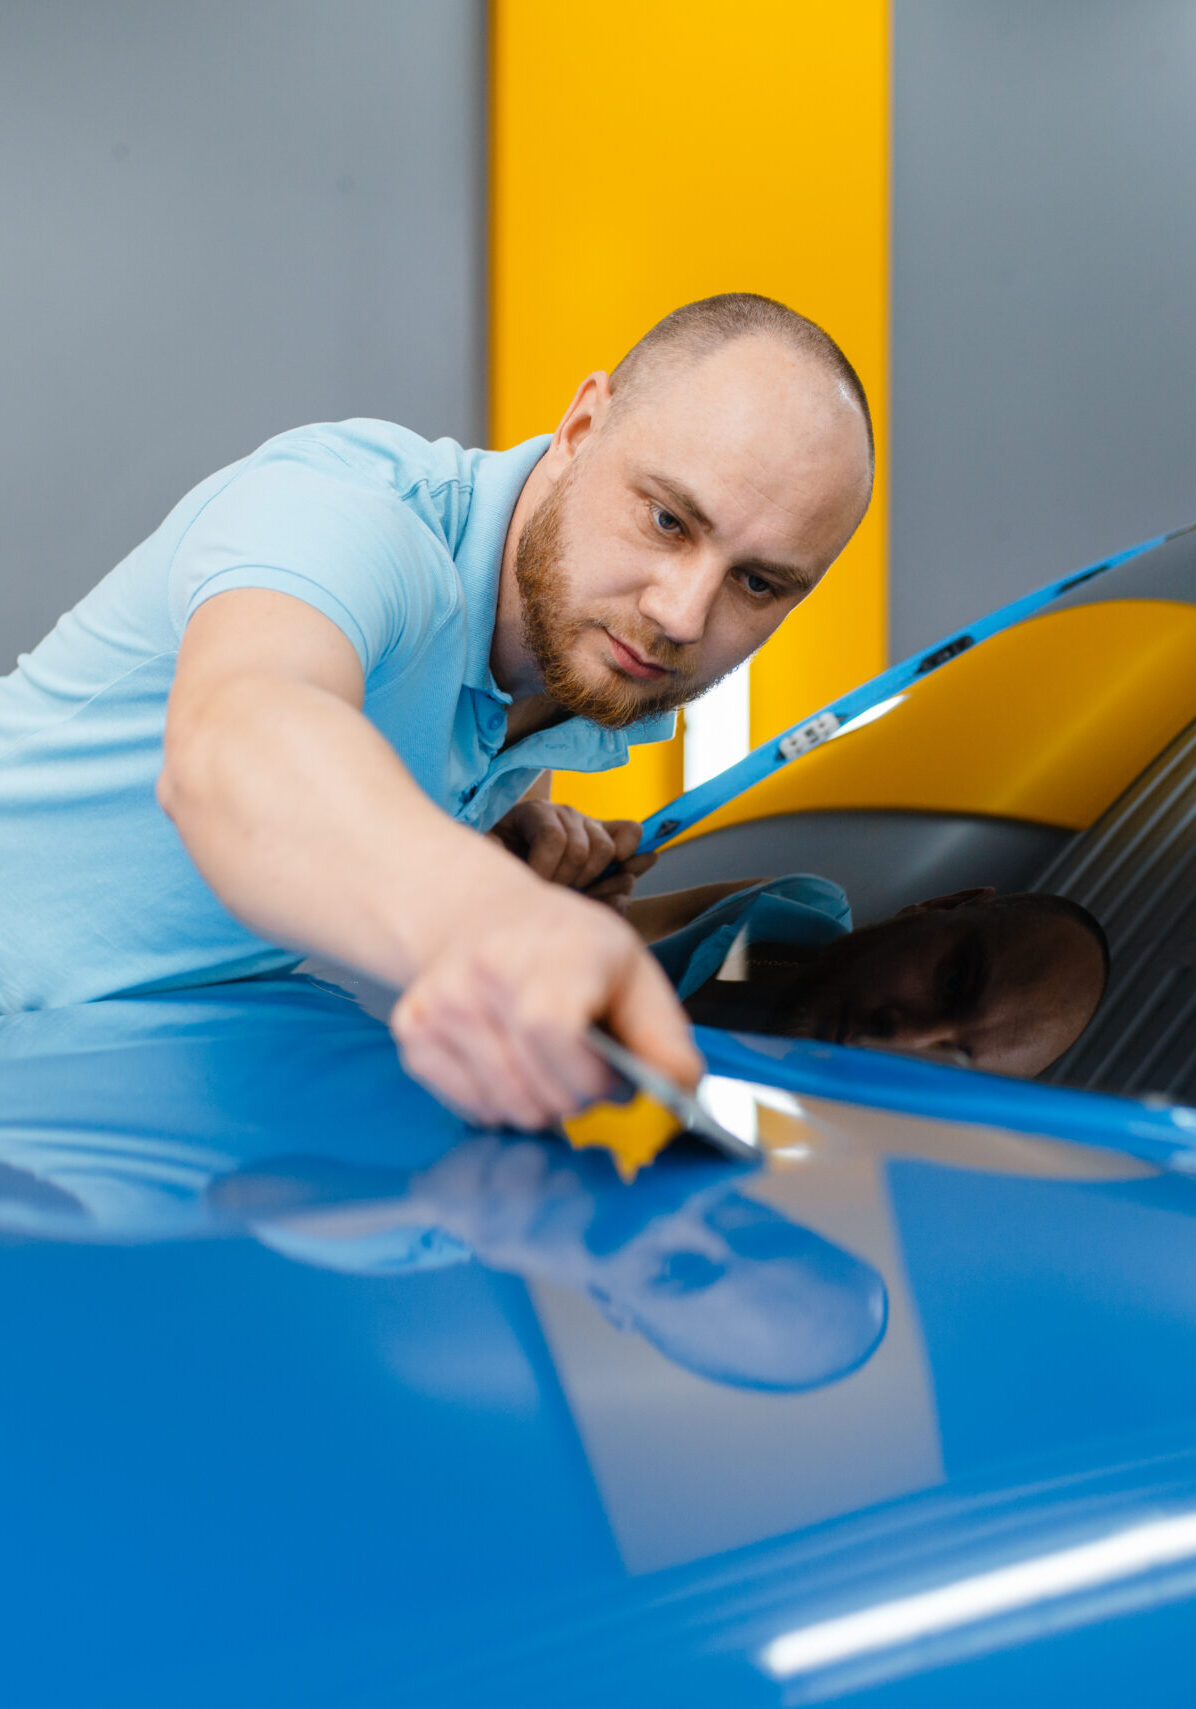 Male car wrapper with squeegee installs protective vinyl foil or film on hood. Worker makes auto detailing. Automobile paint protection coating, professional tuning